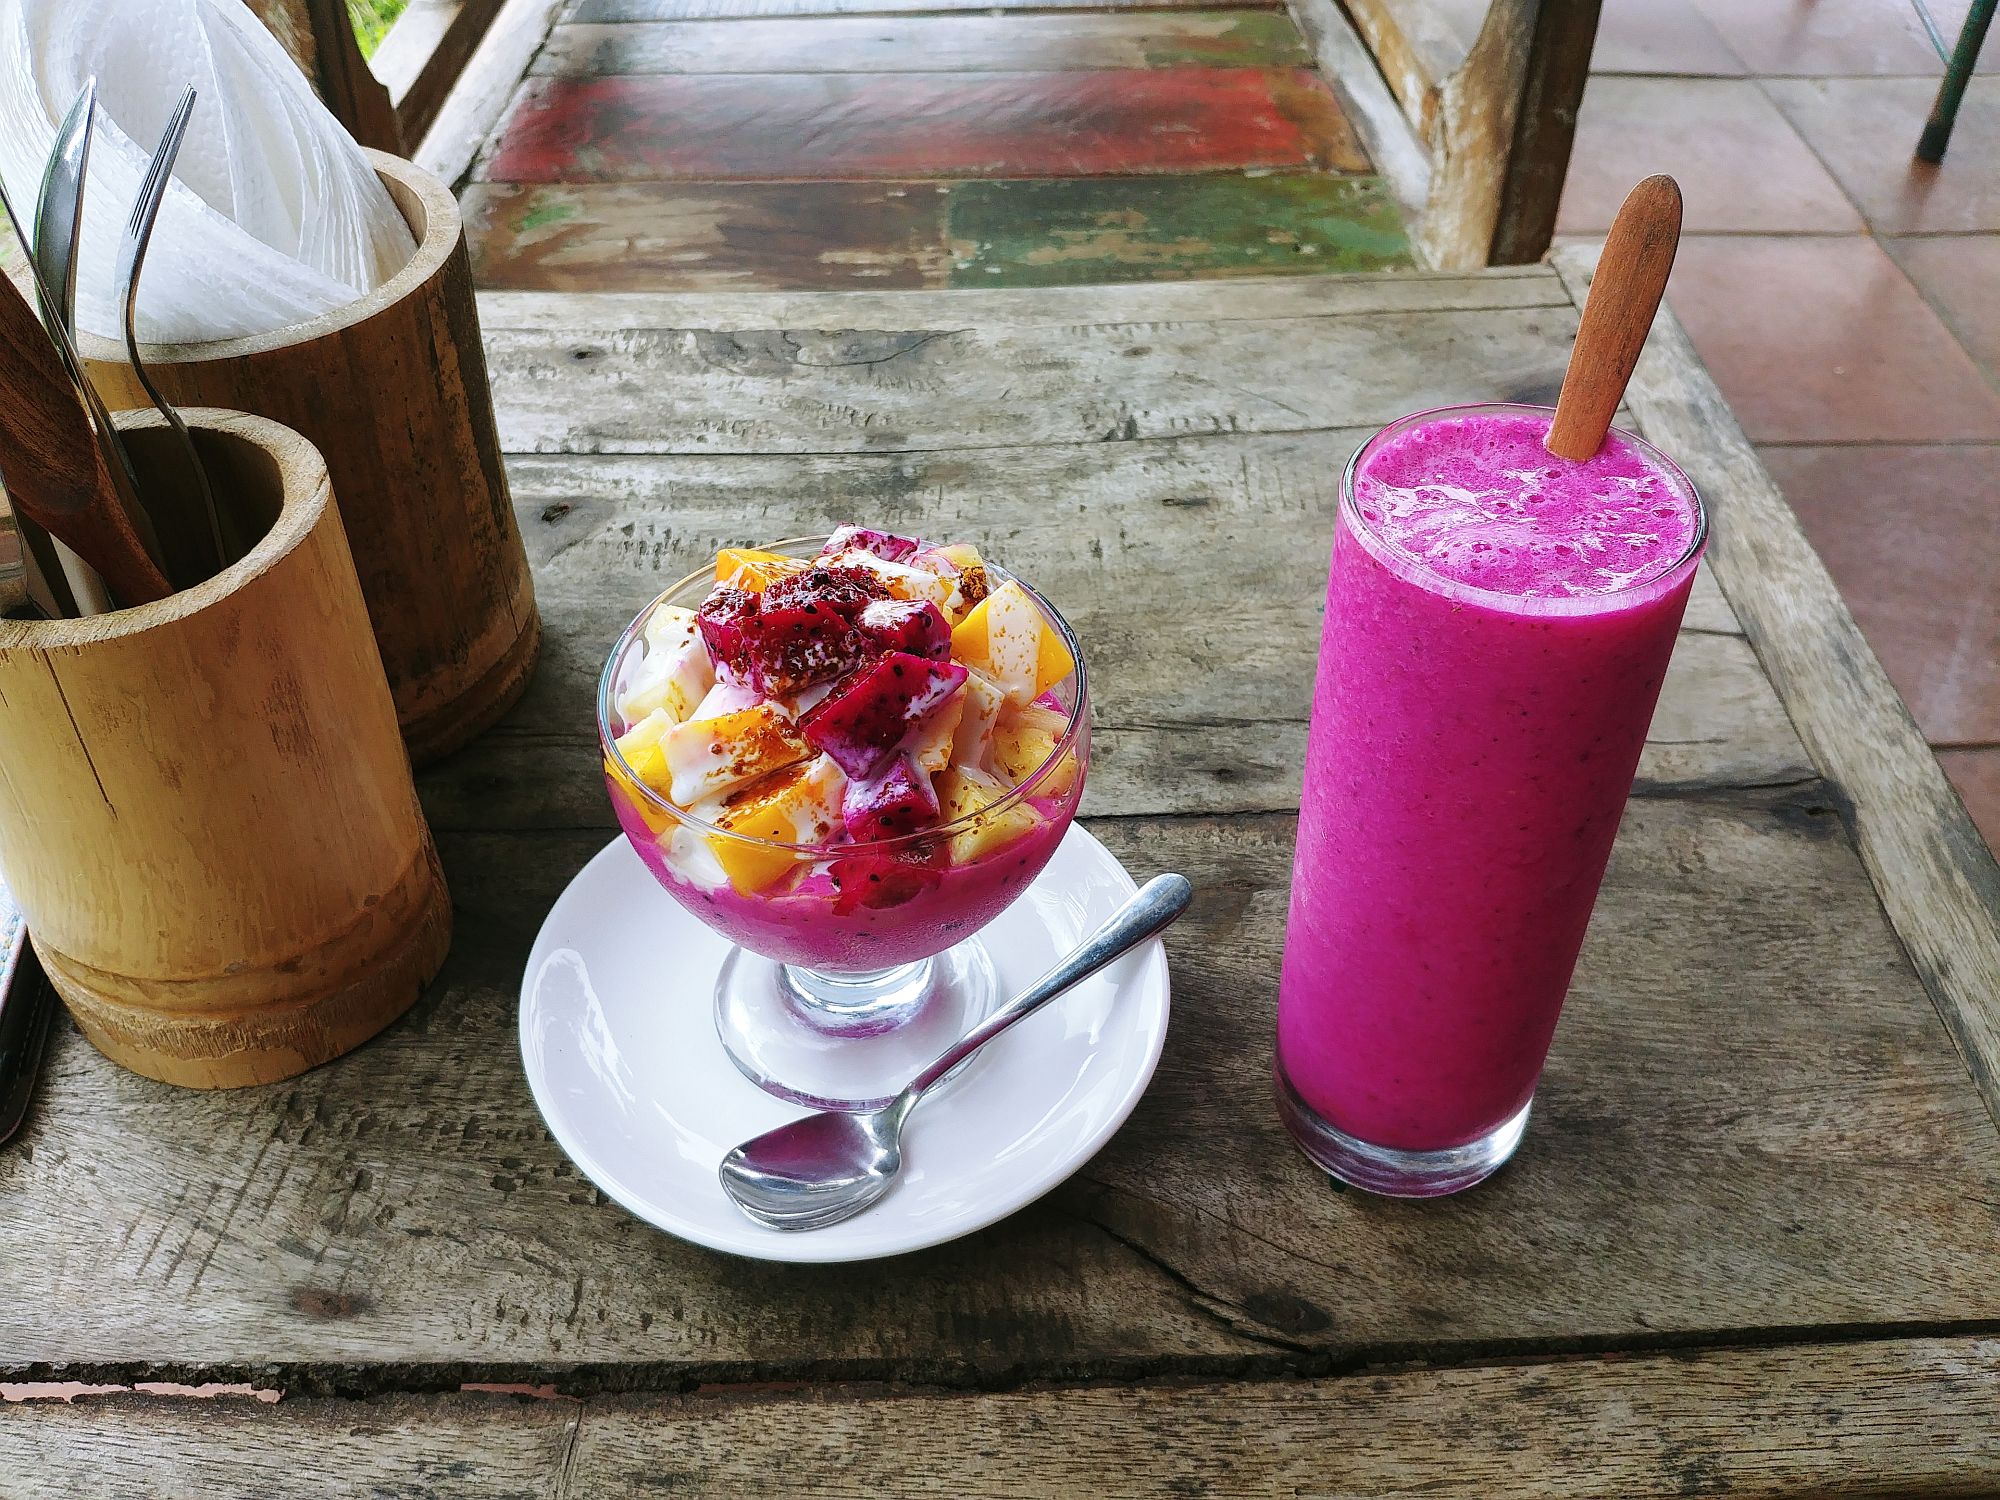 Ubud - Strawberry hill and Gede juice